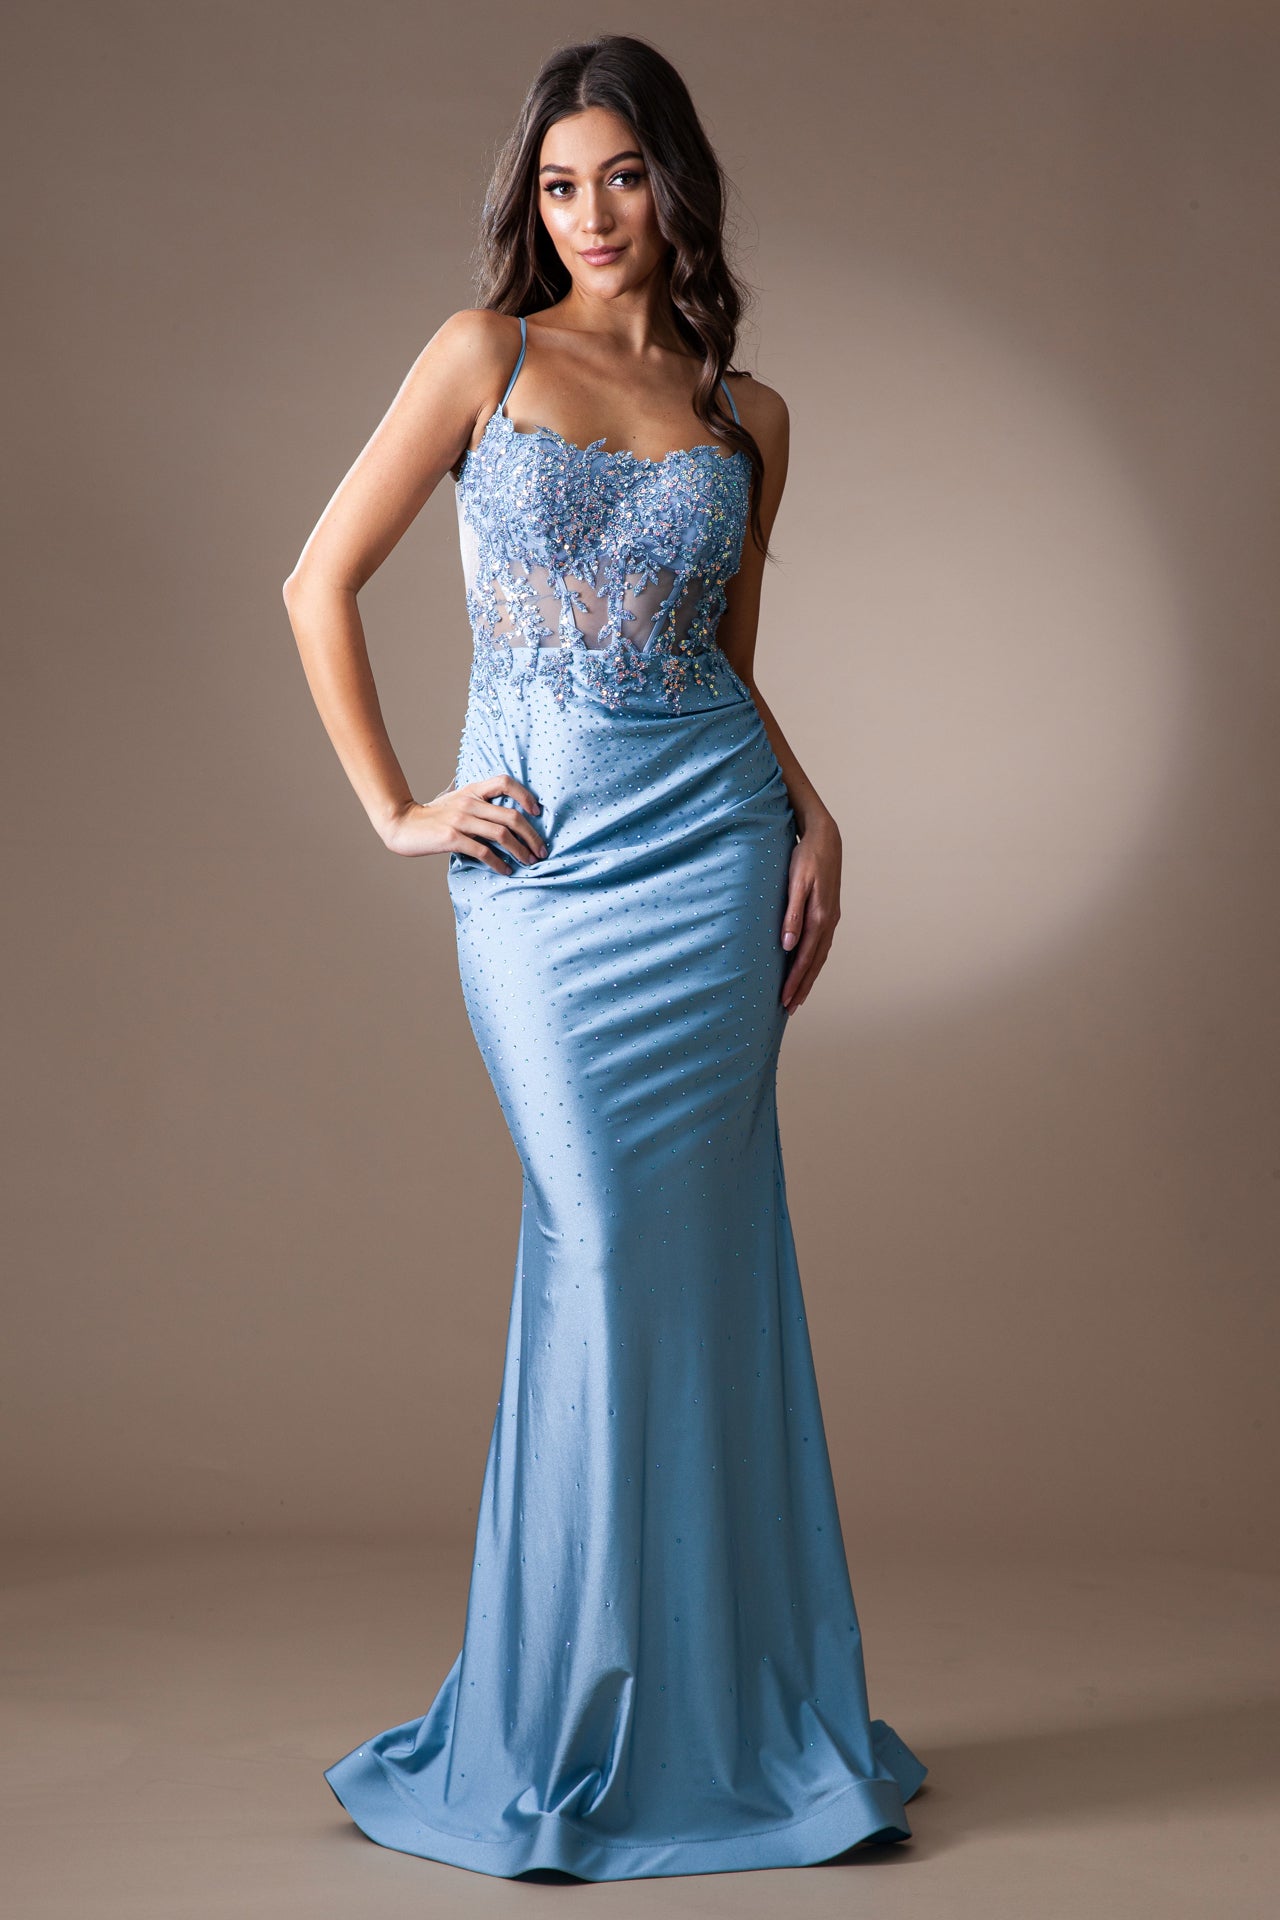 AC24-TM1018 Fitted Hot Stone Gown Scoop Crisscross Straps Detail Beaded Sheer Illusion Boned Bodice Gather at zipper , Open back.